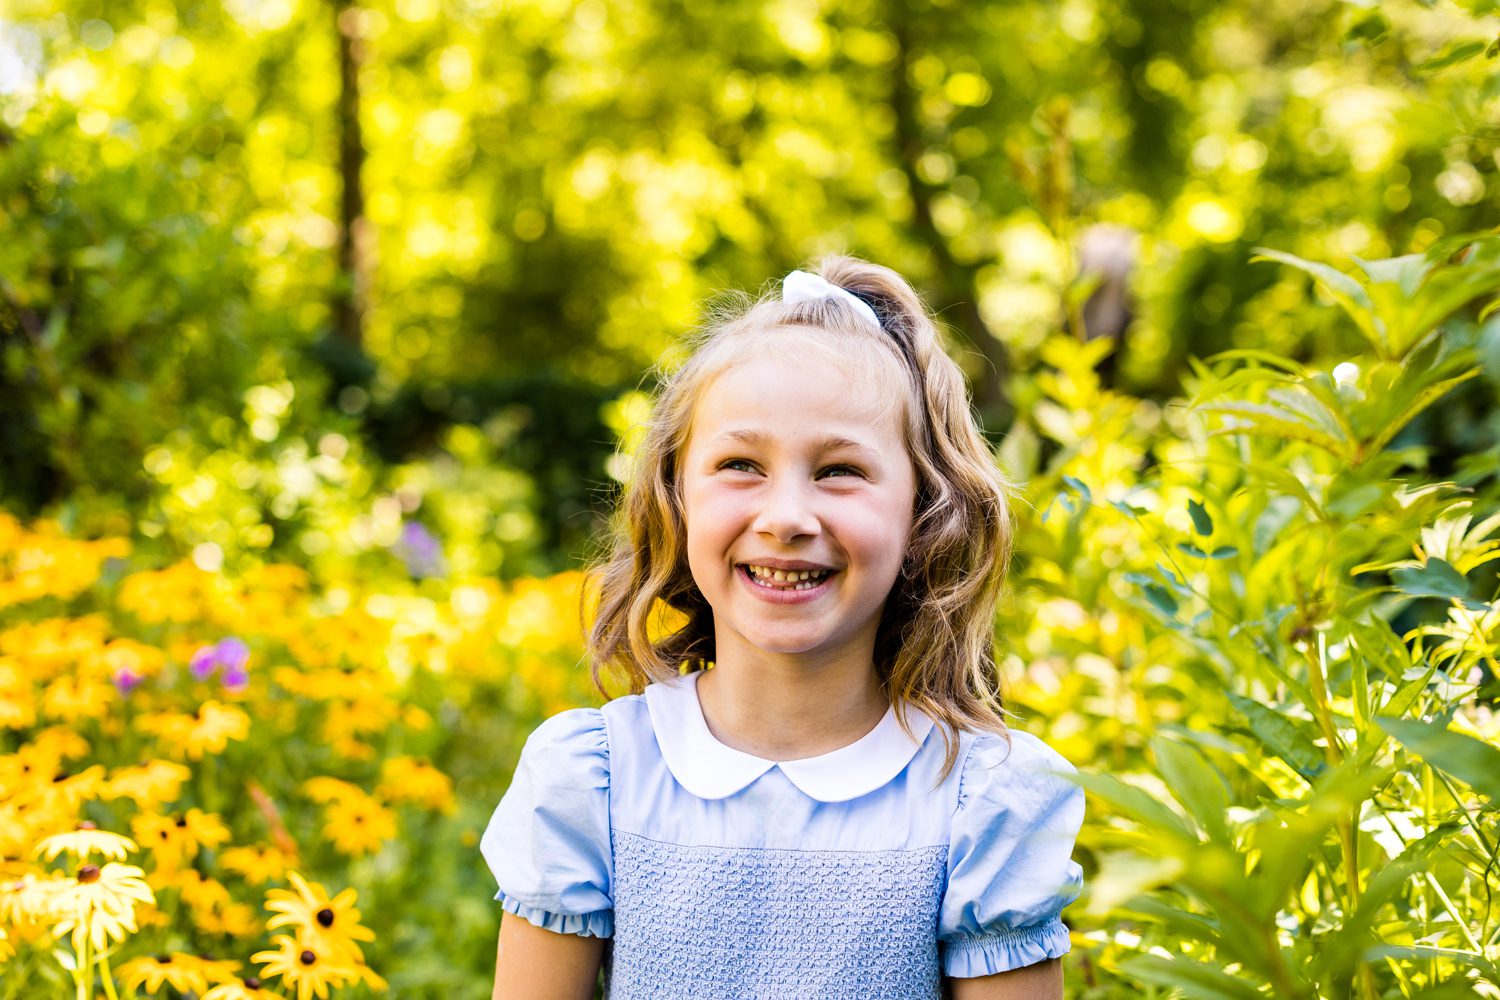 Girl in blue dress smiling in a garden for family portraits